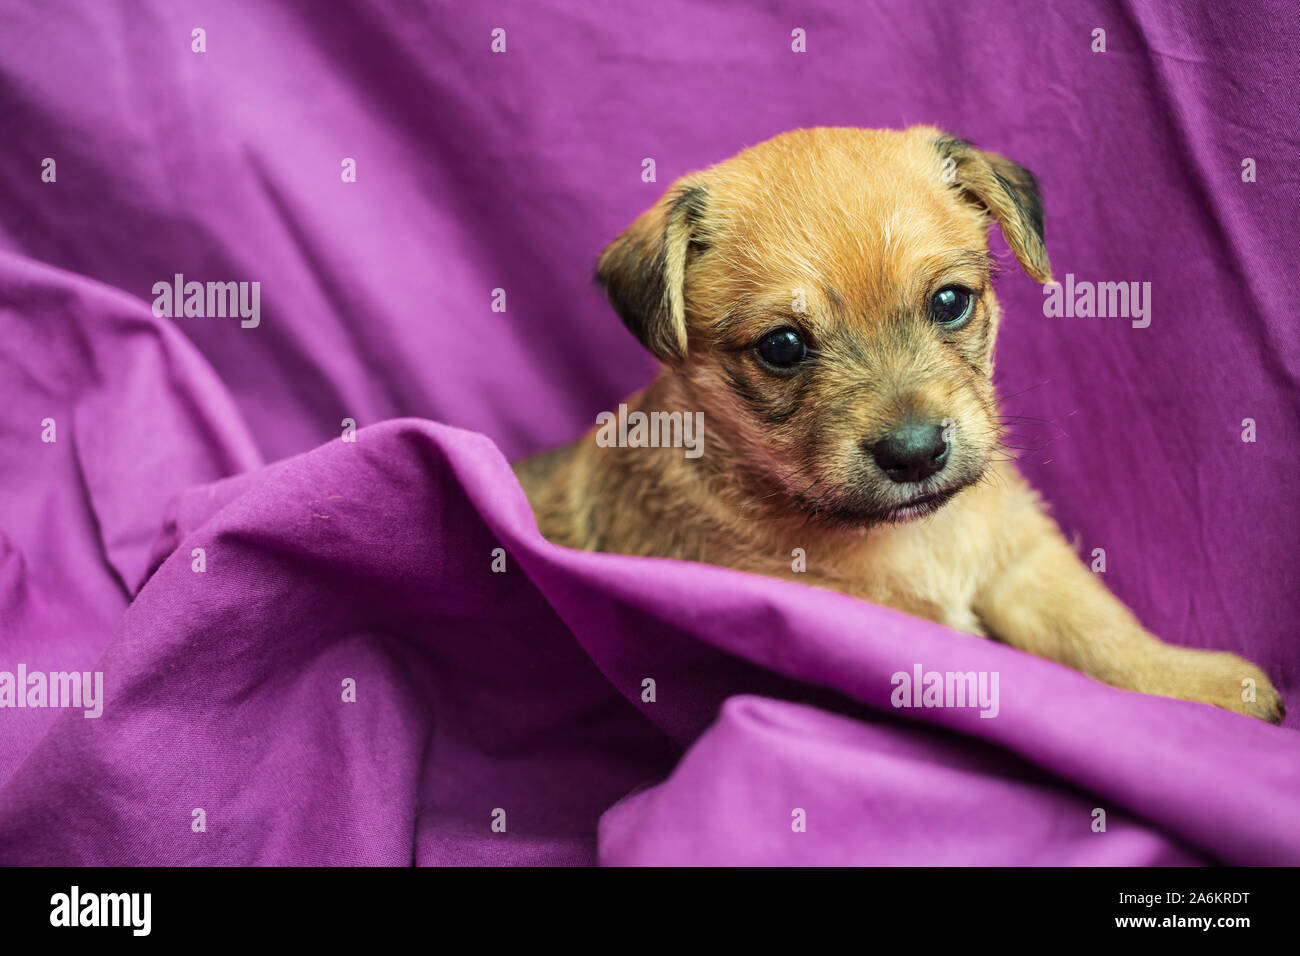 Cute puppy in folds of purple fabric Stock Photo